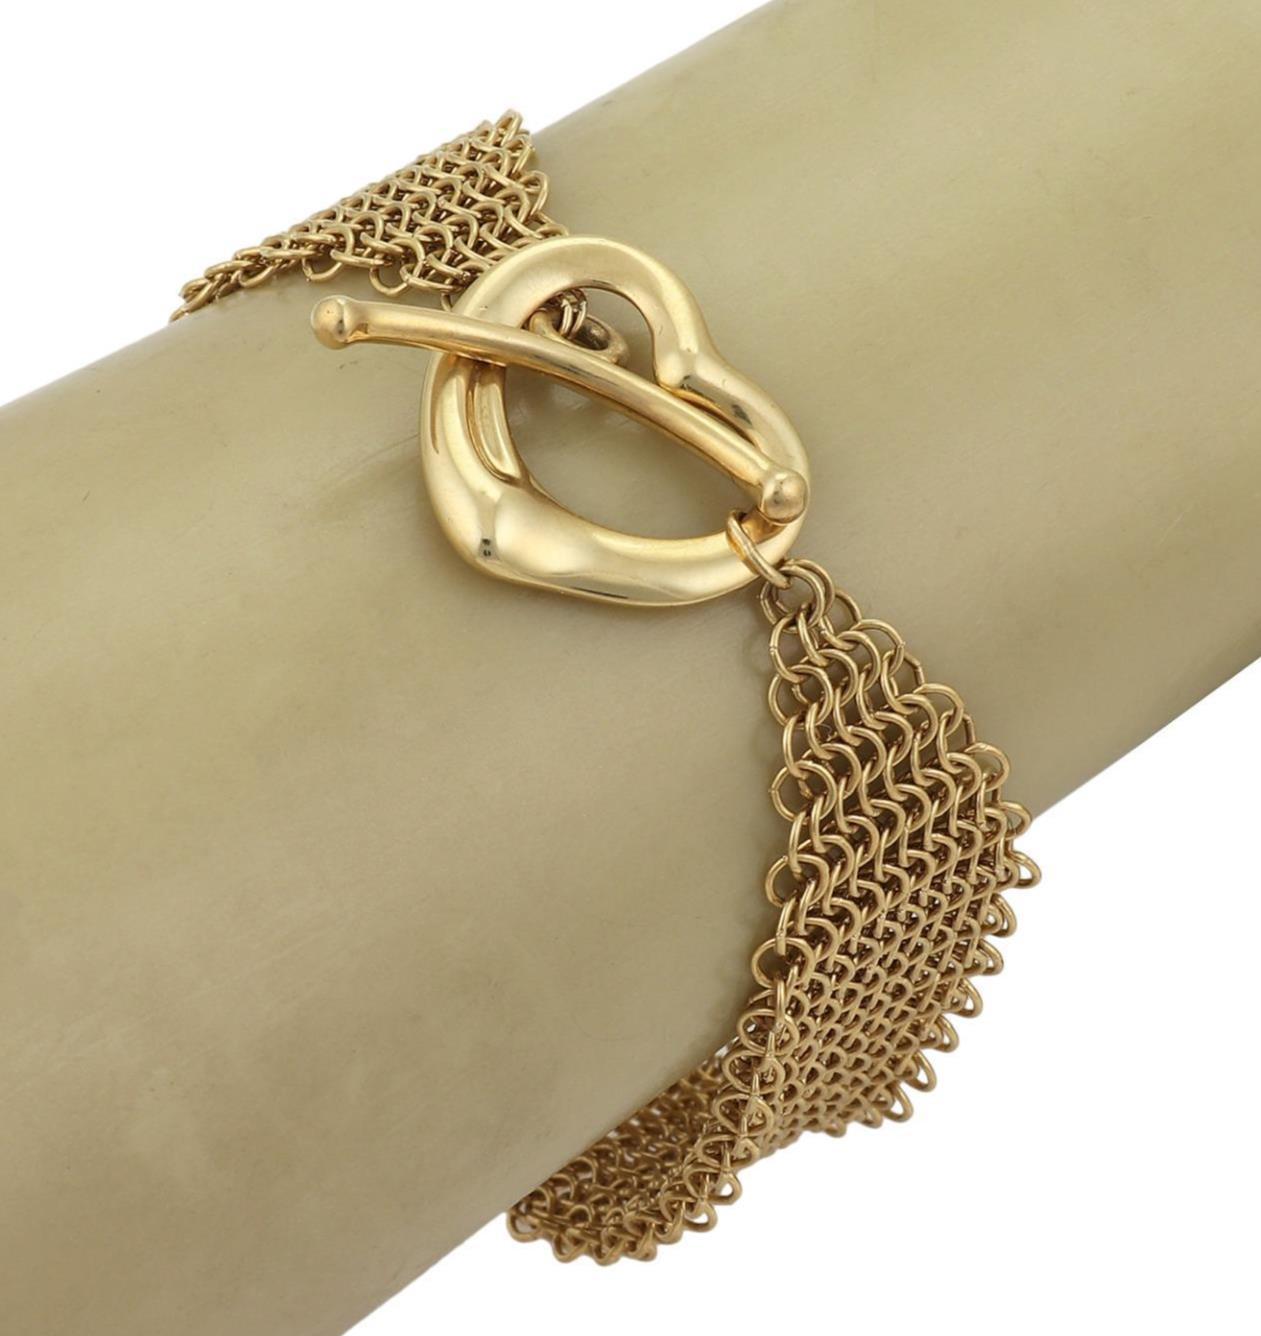 This is a lovely authentic bracelet from Tiffany & Co. by designer Elsa Peretti from her Open Heart collection. It is crafted from 18k yellow gold featuring a 22mm wide mesh link chain bracelet with the Open heart toggle clasp. The mesh chain have a